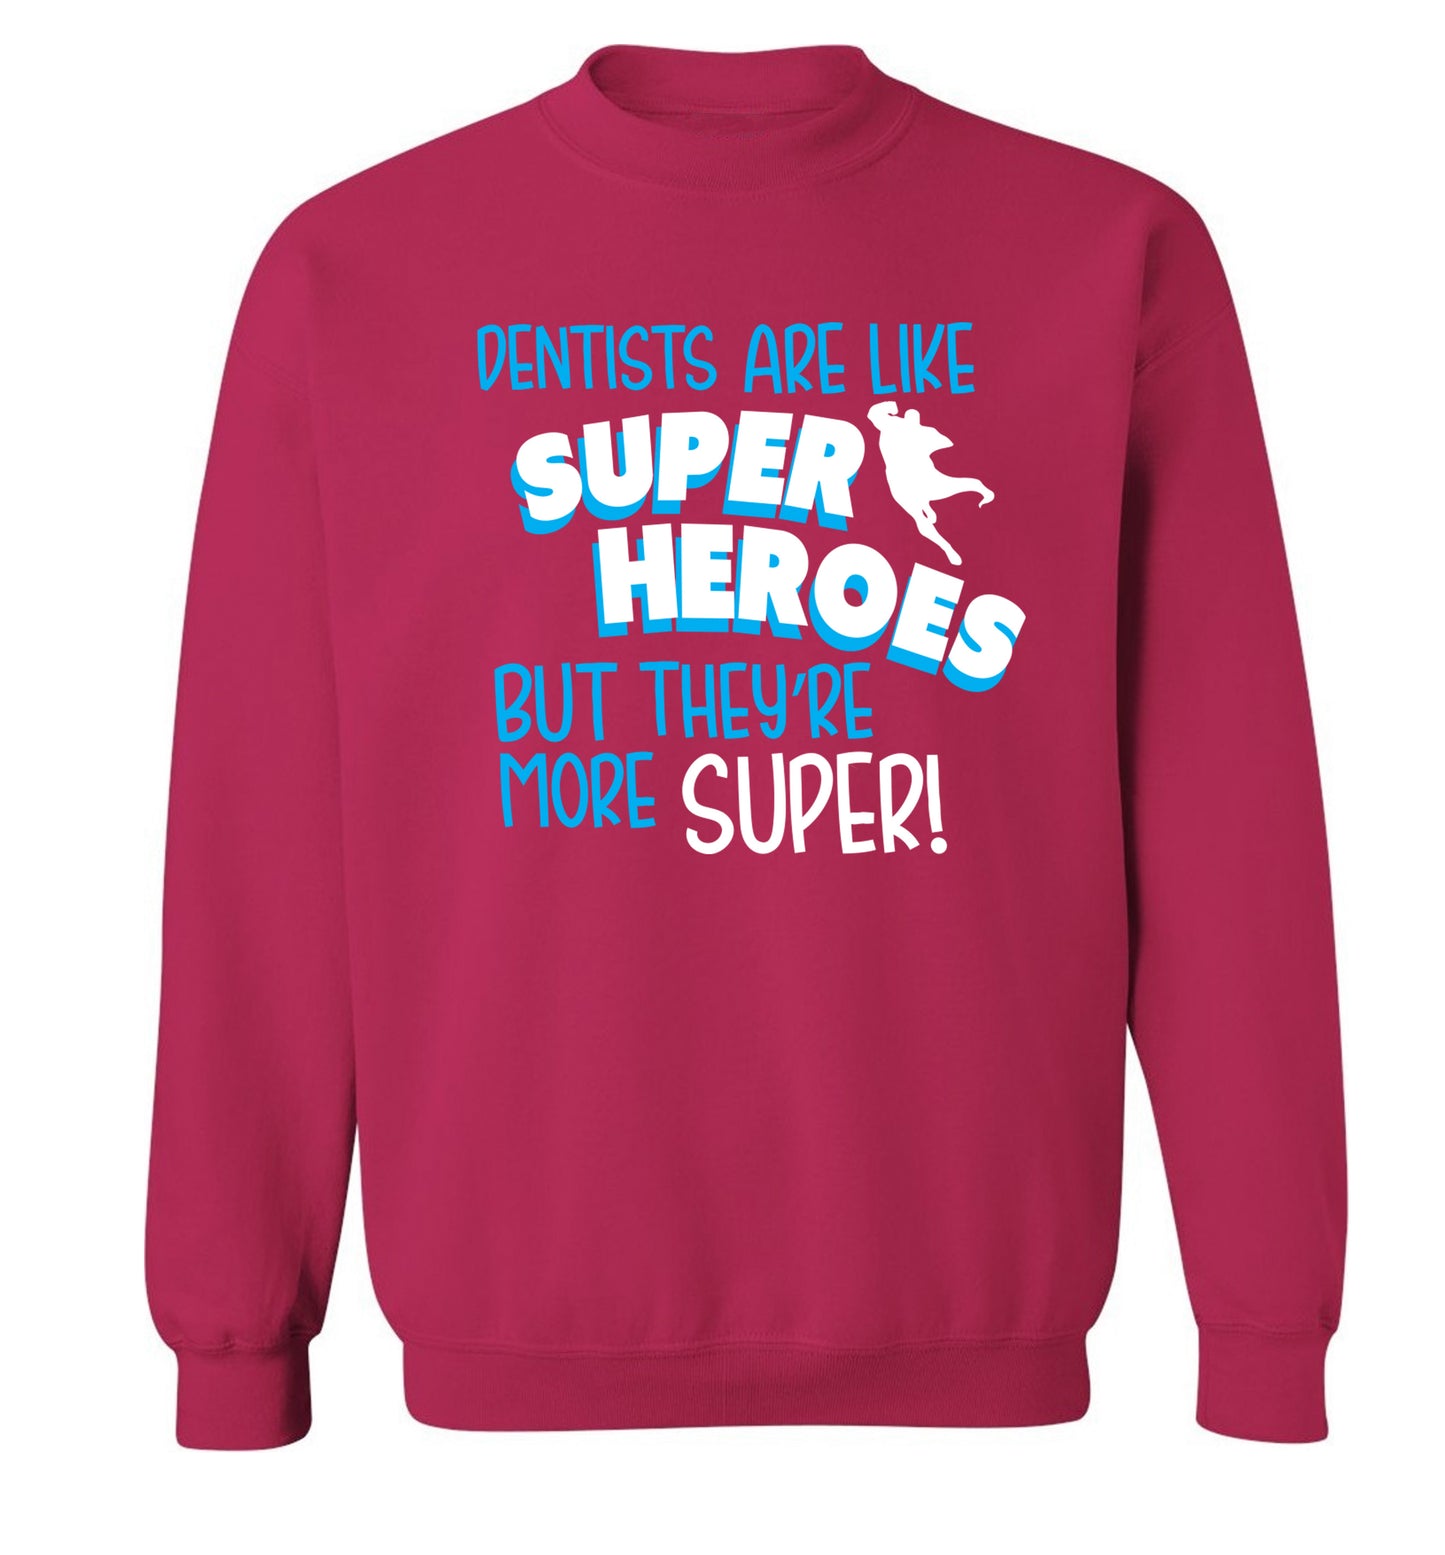 Dentists are like superheros but they're more super Adult's unisex pink Sweater 2XL